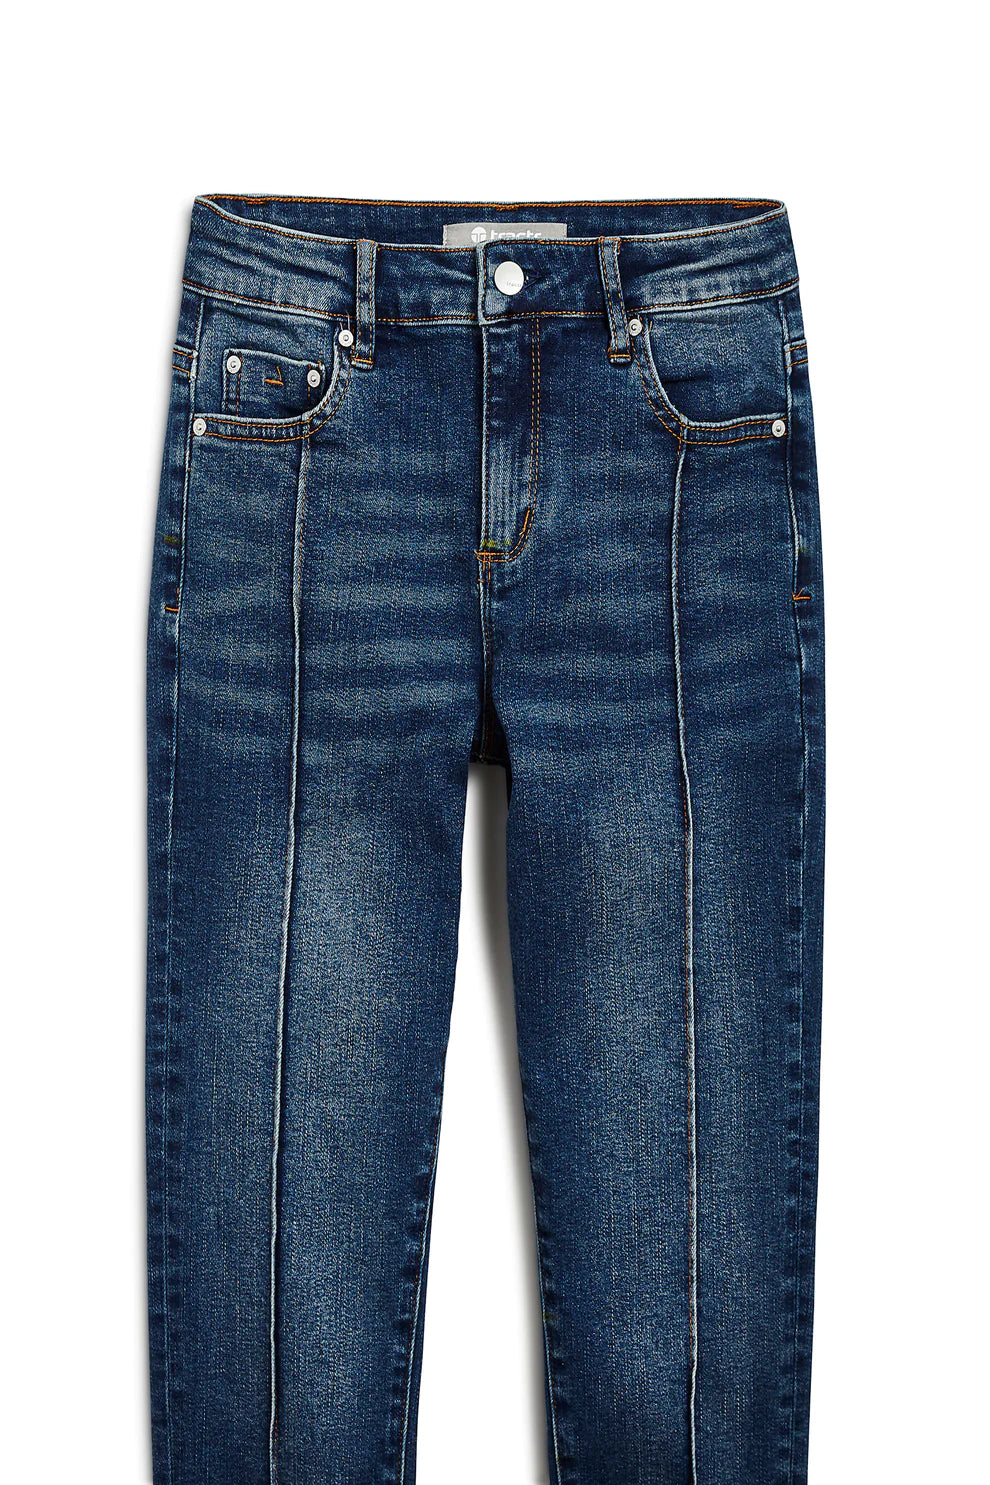 Tractr Nina Youth Jeans